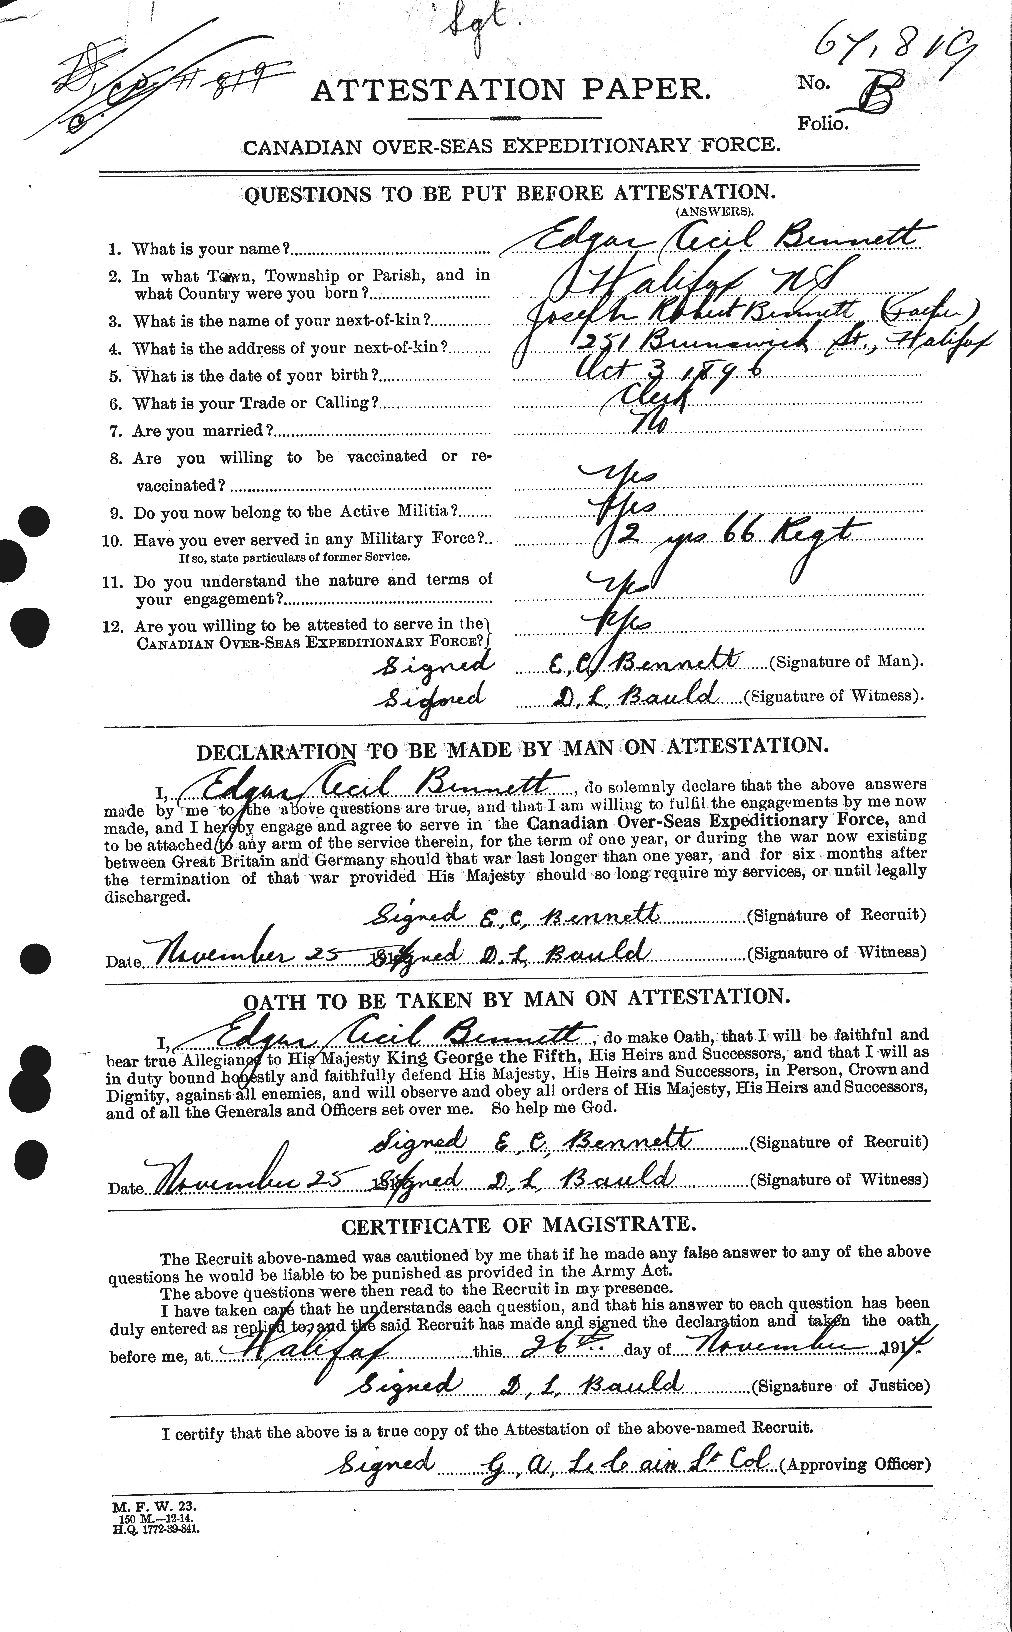 Personnel Records of the First World War - CEF 233453a